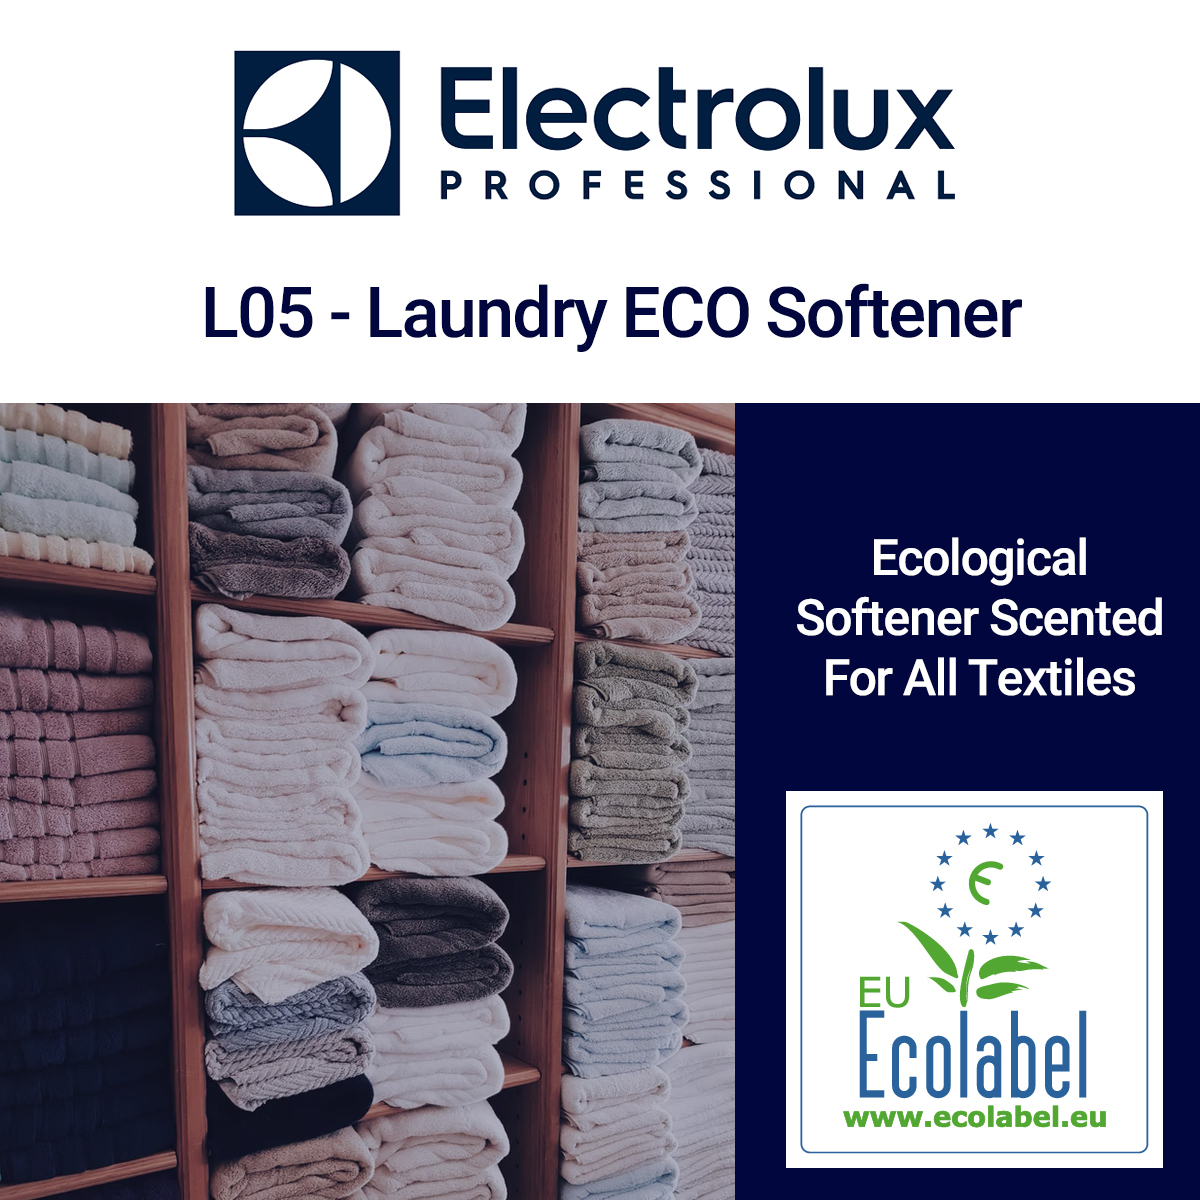 Electrolux Laundry L05 ECO Softener Scented for All Textiles - 20 Litre Drum